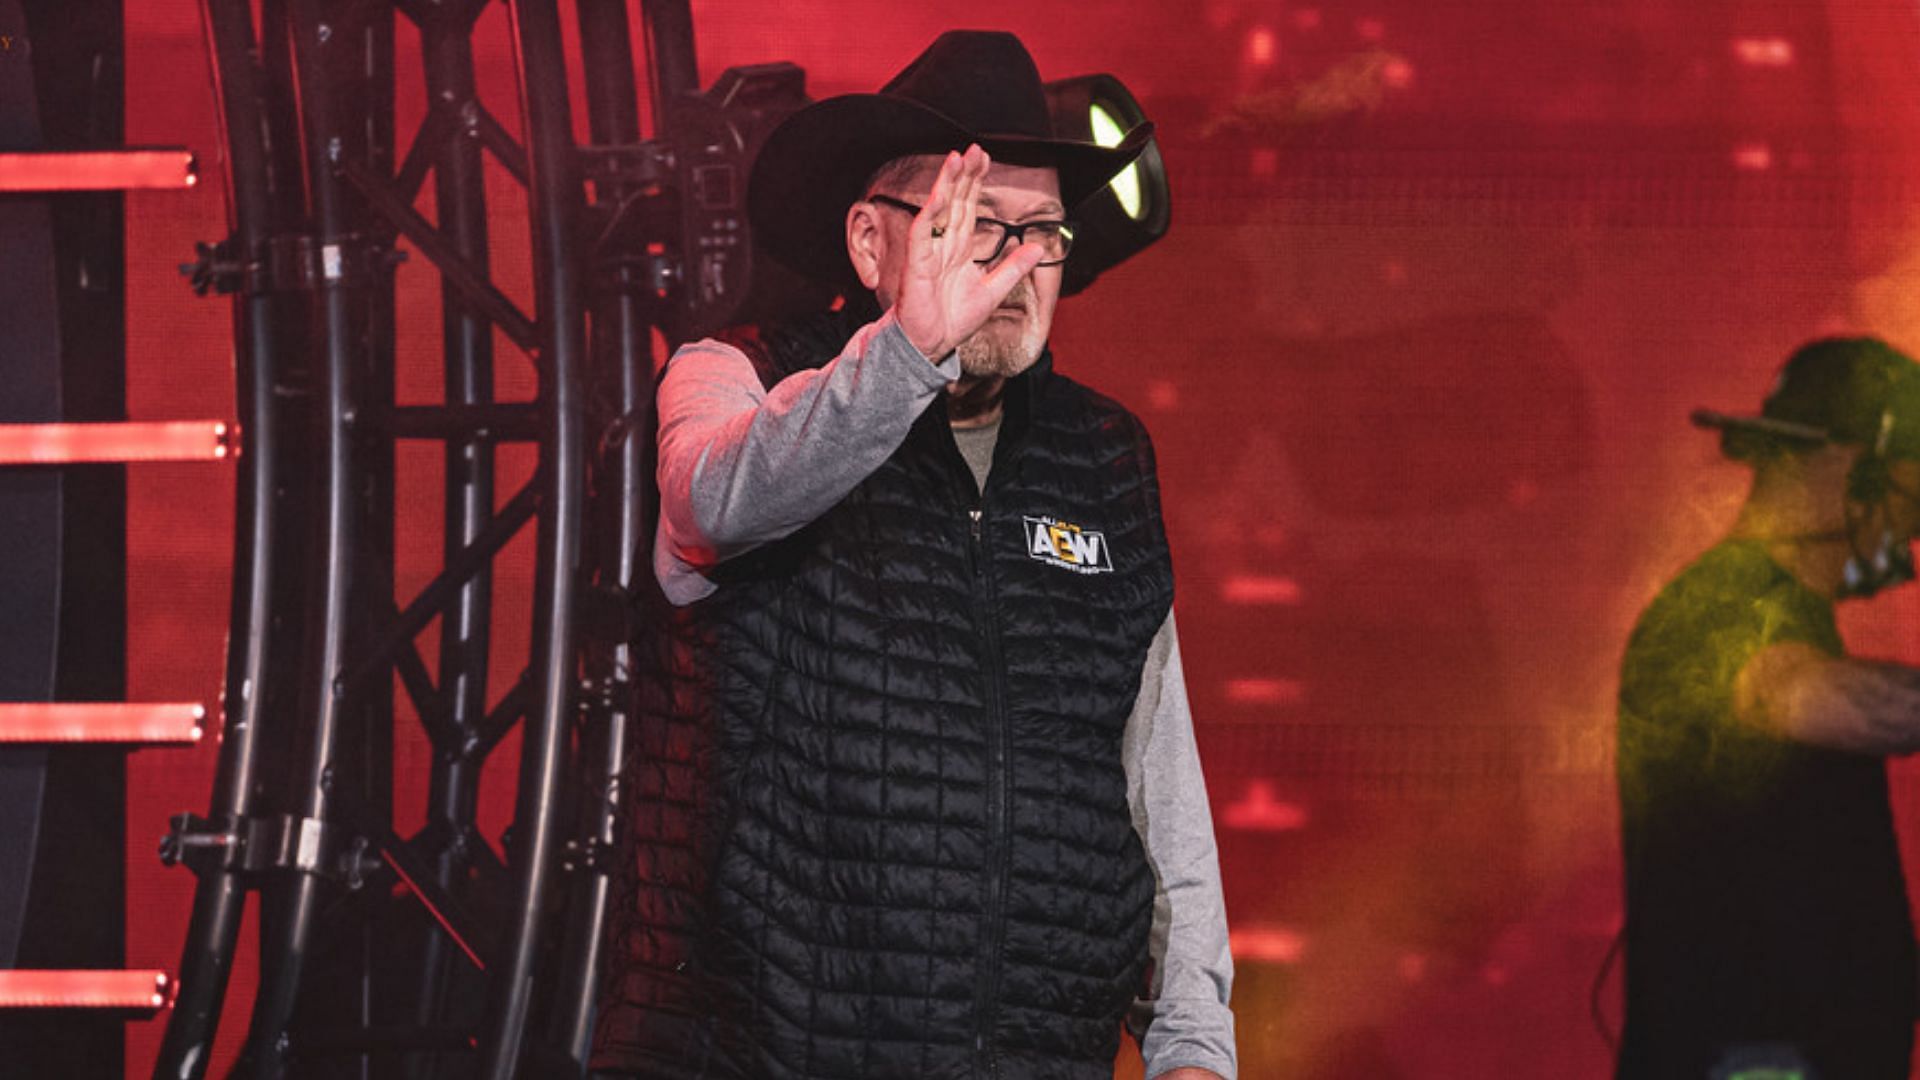 Jim Ross making his entrance at an AEW event